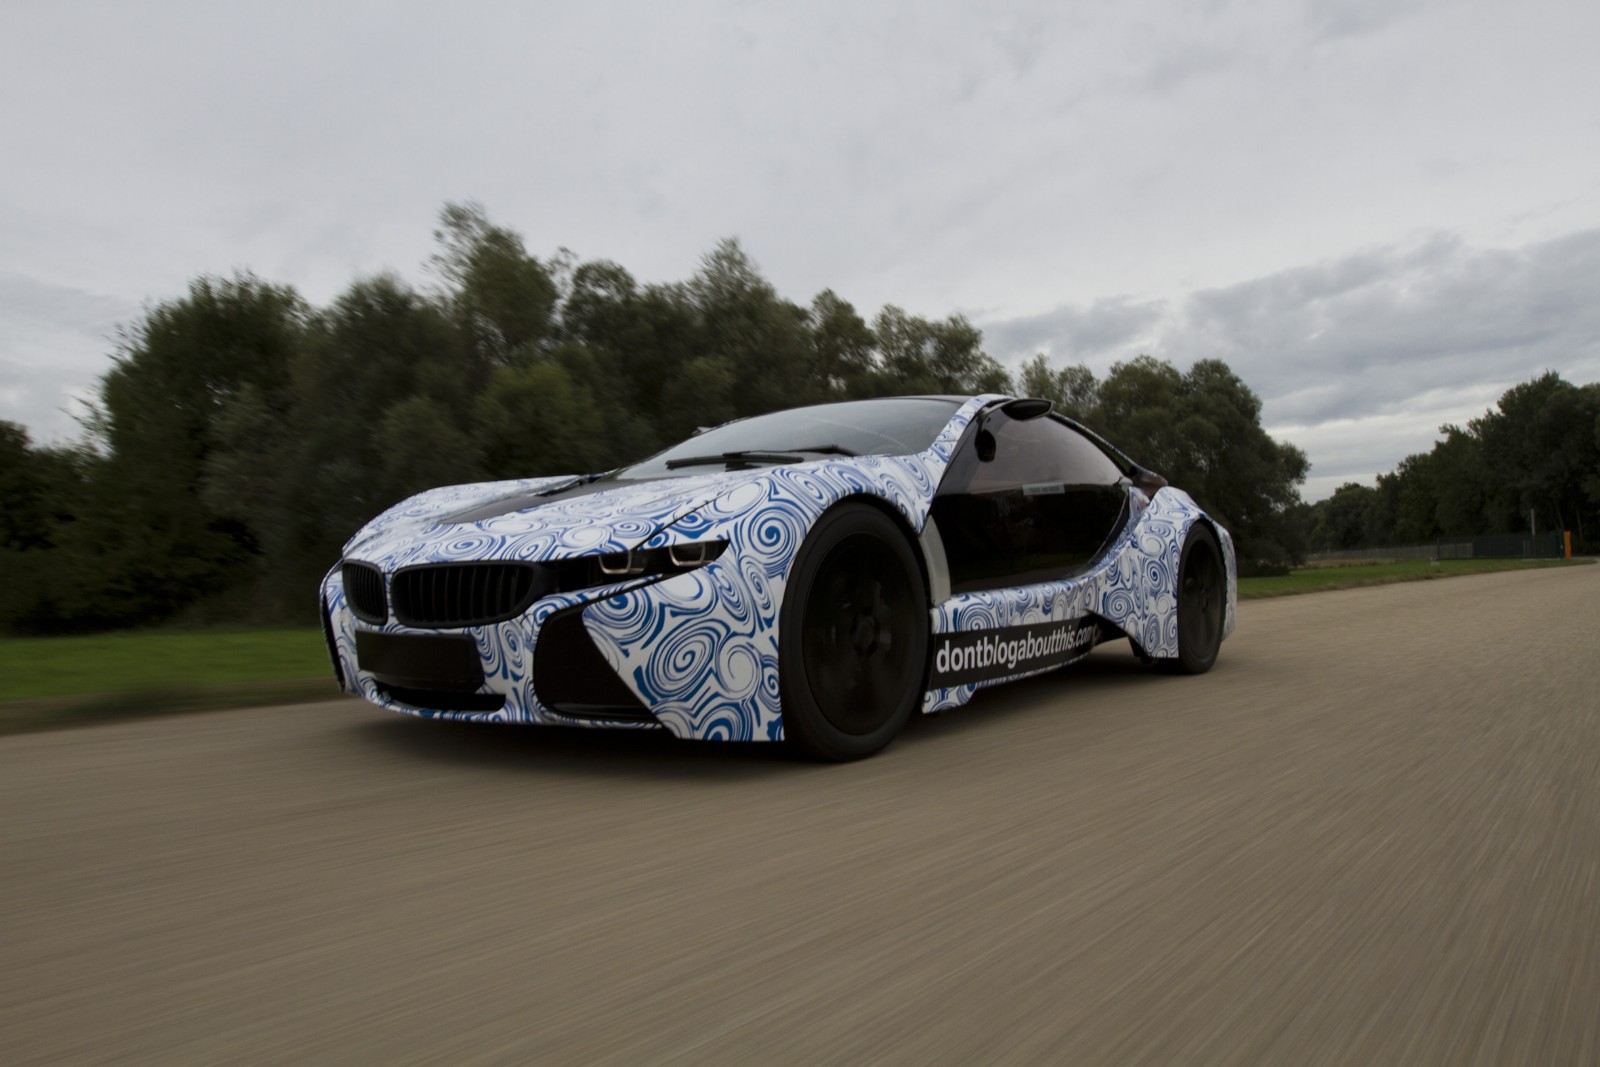 CoDriving BMW Vision Concept Supercar Of The Future